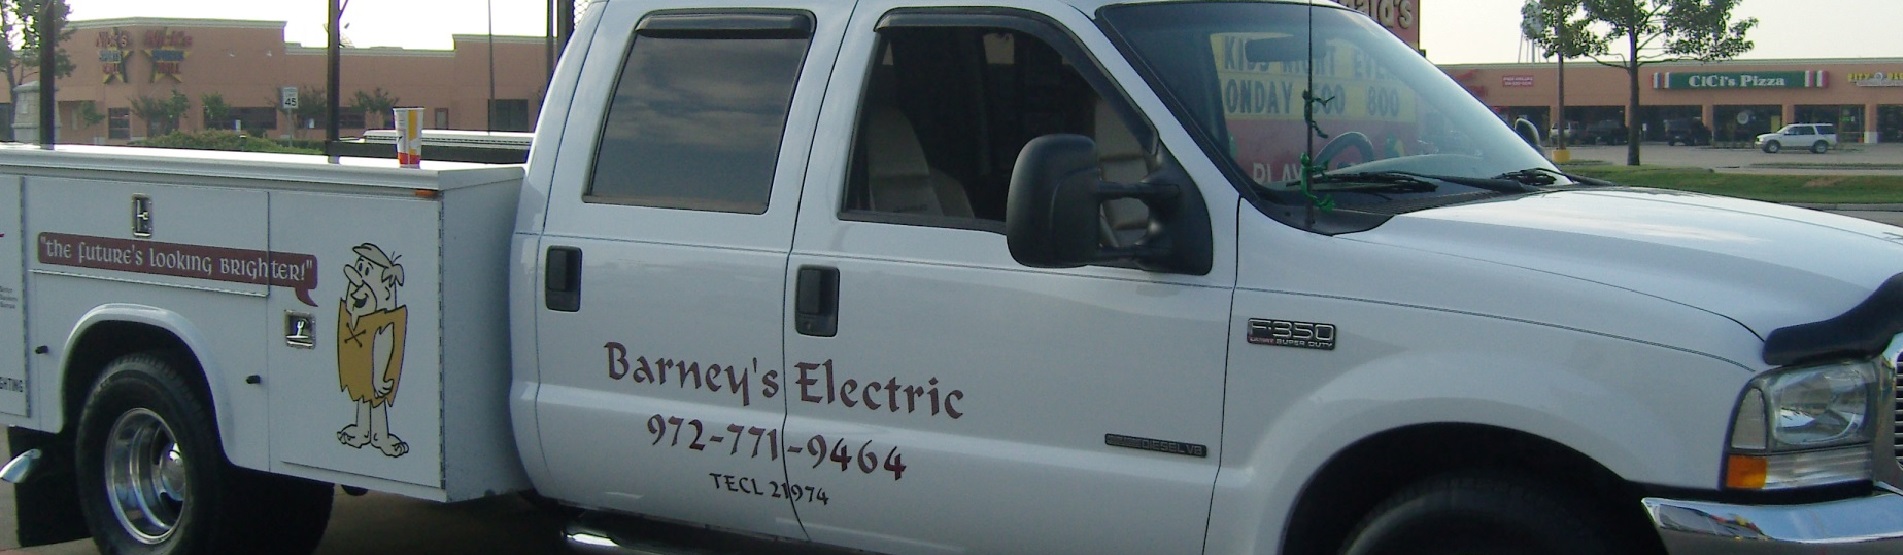 Electrician Terrell TX Barney's Electric Full Service Electrician Residential Commercial Retail and New Construction Wiring Repair Installation Service 24 Hour Emergency Services Master Electrician Rockwall Texas